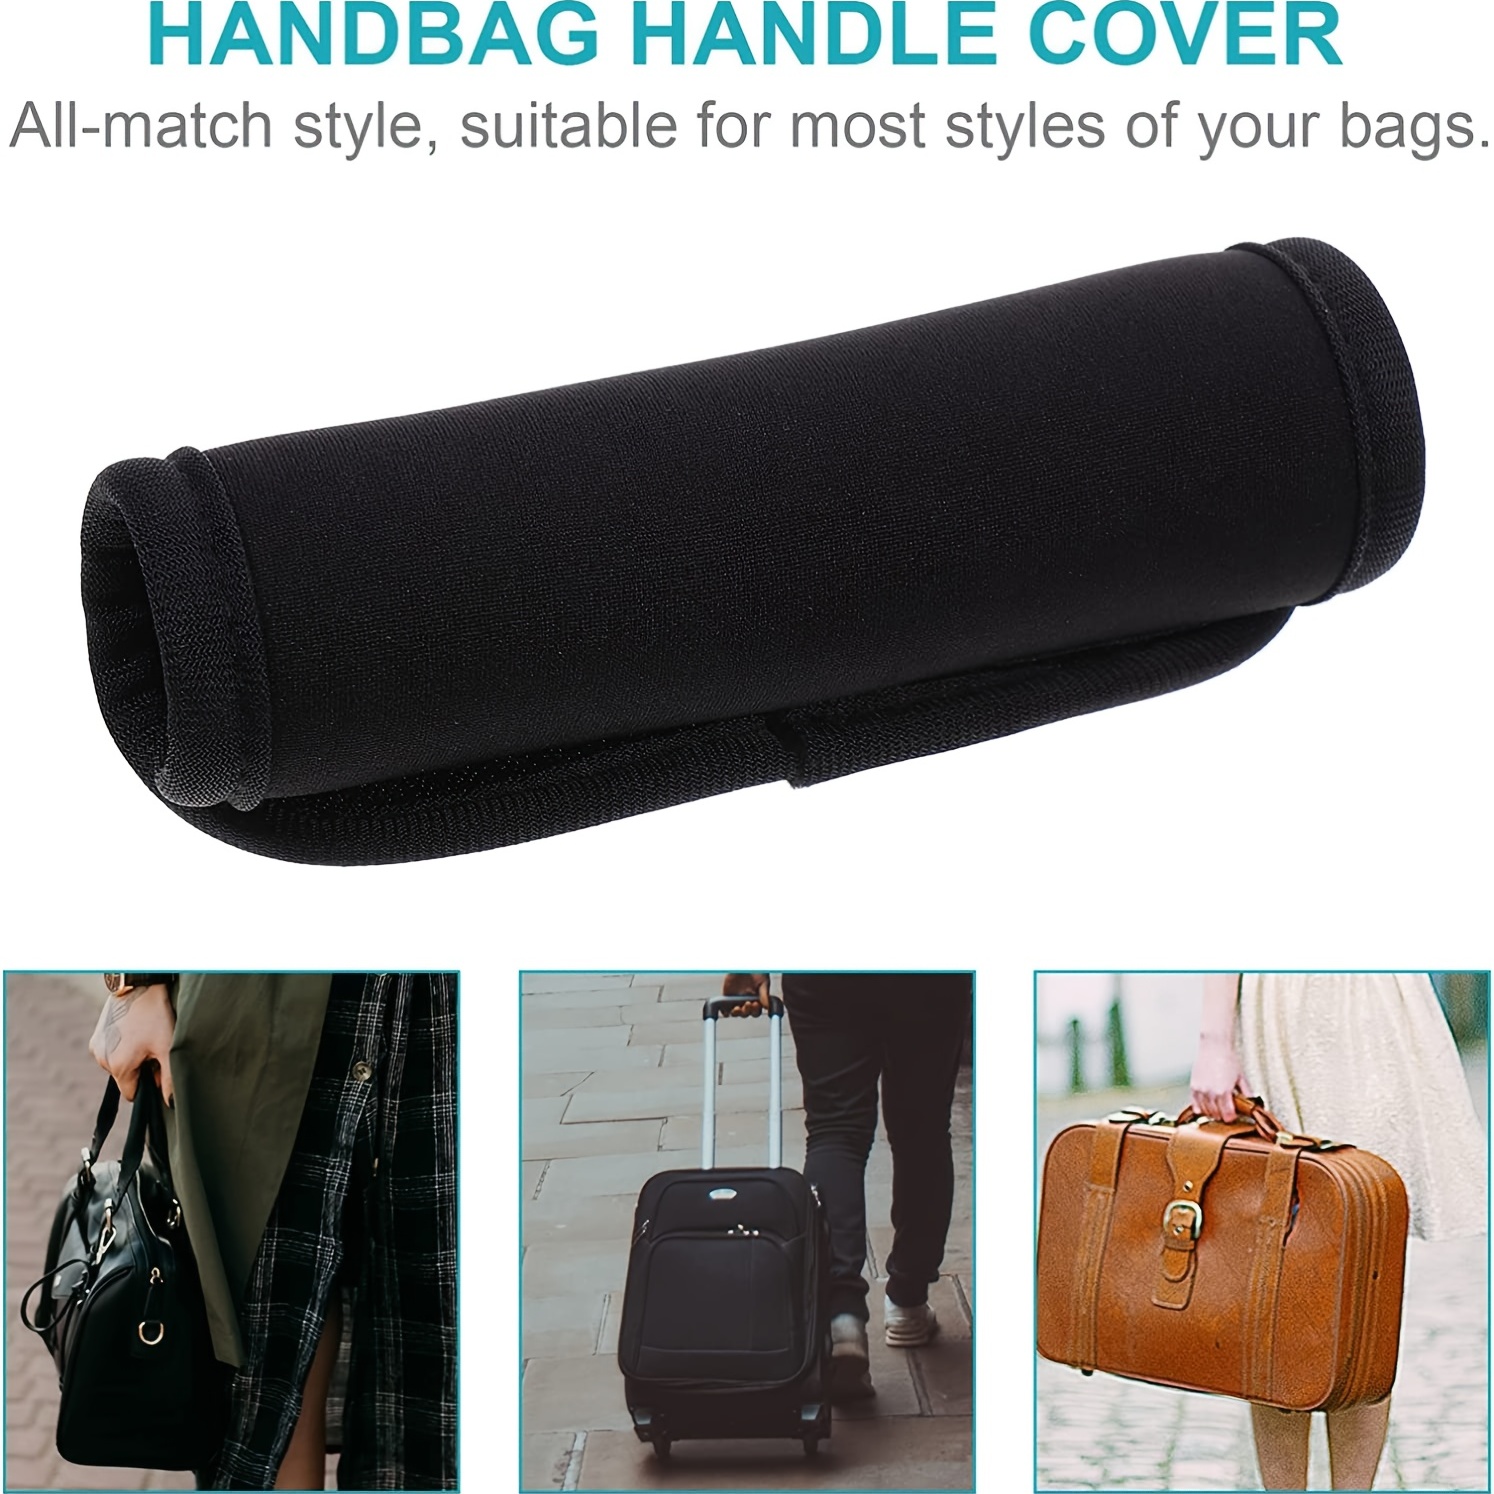 bag handle cover